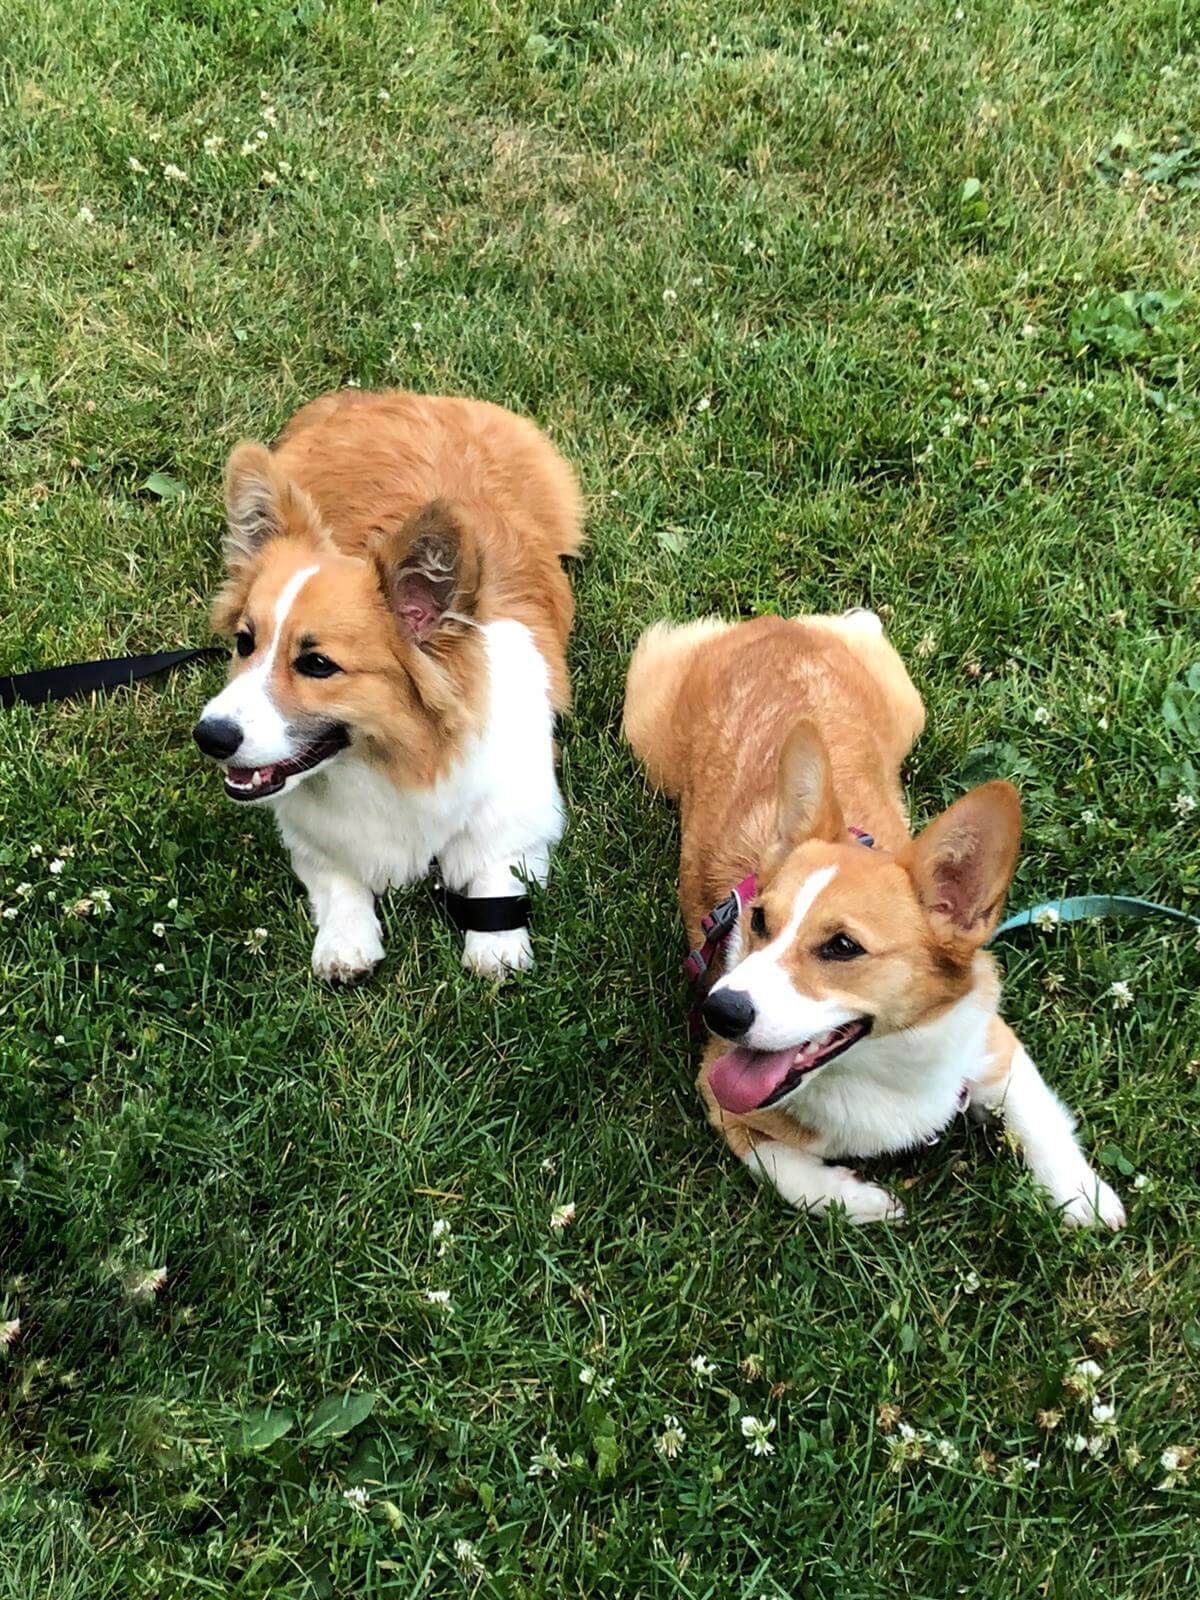 Riley (left) a red and white fluffy corgi is posing beside Limone, a red and white corgi. They are both laying on the grass.